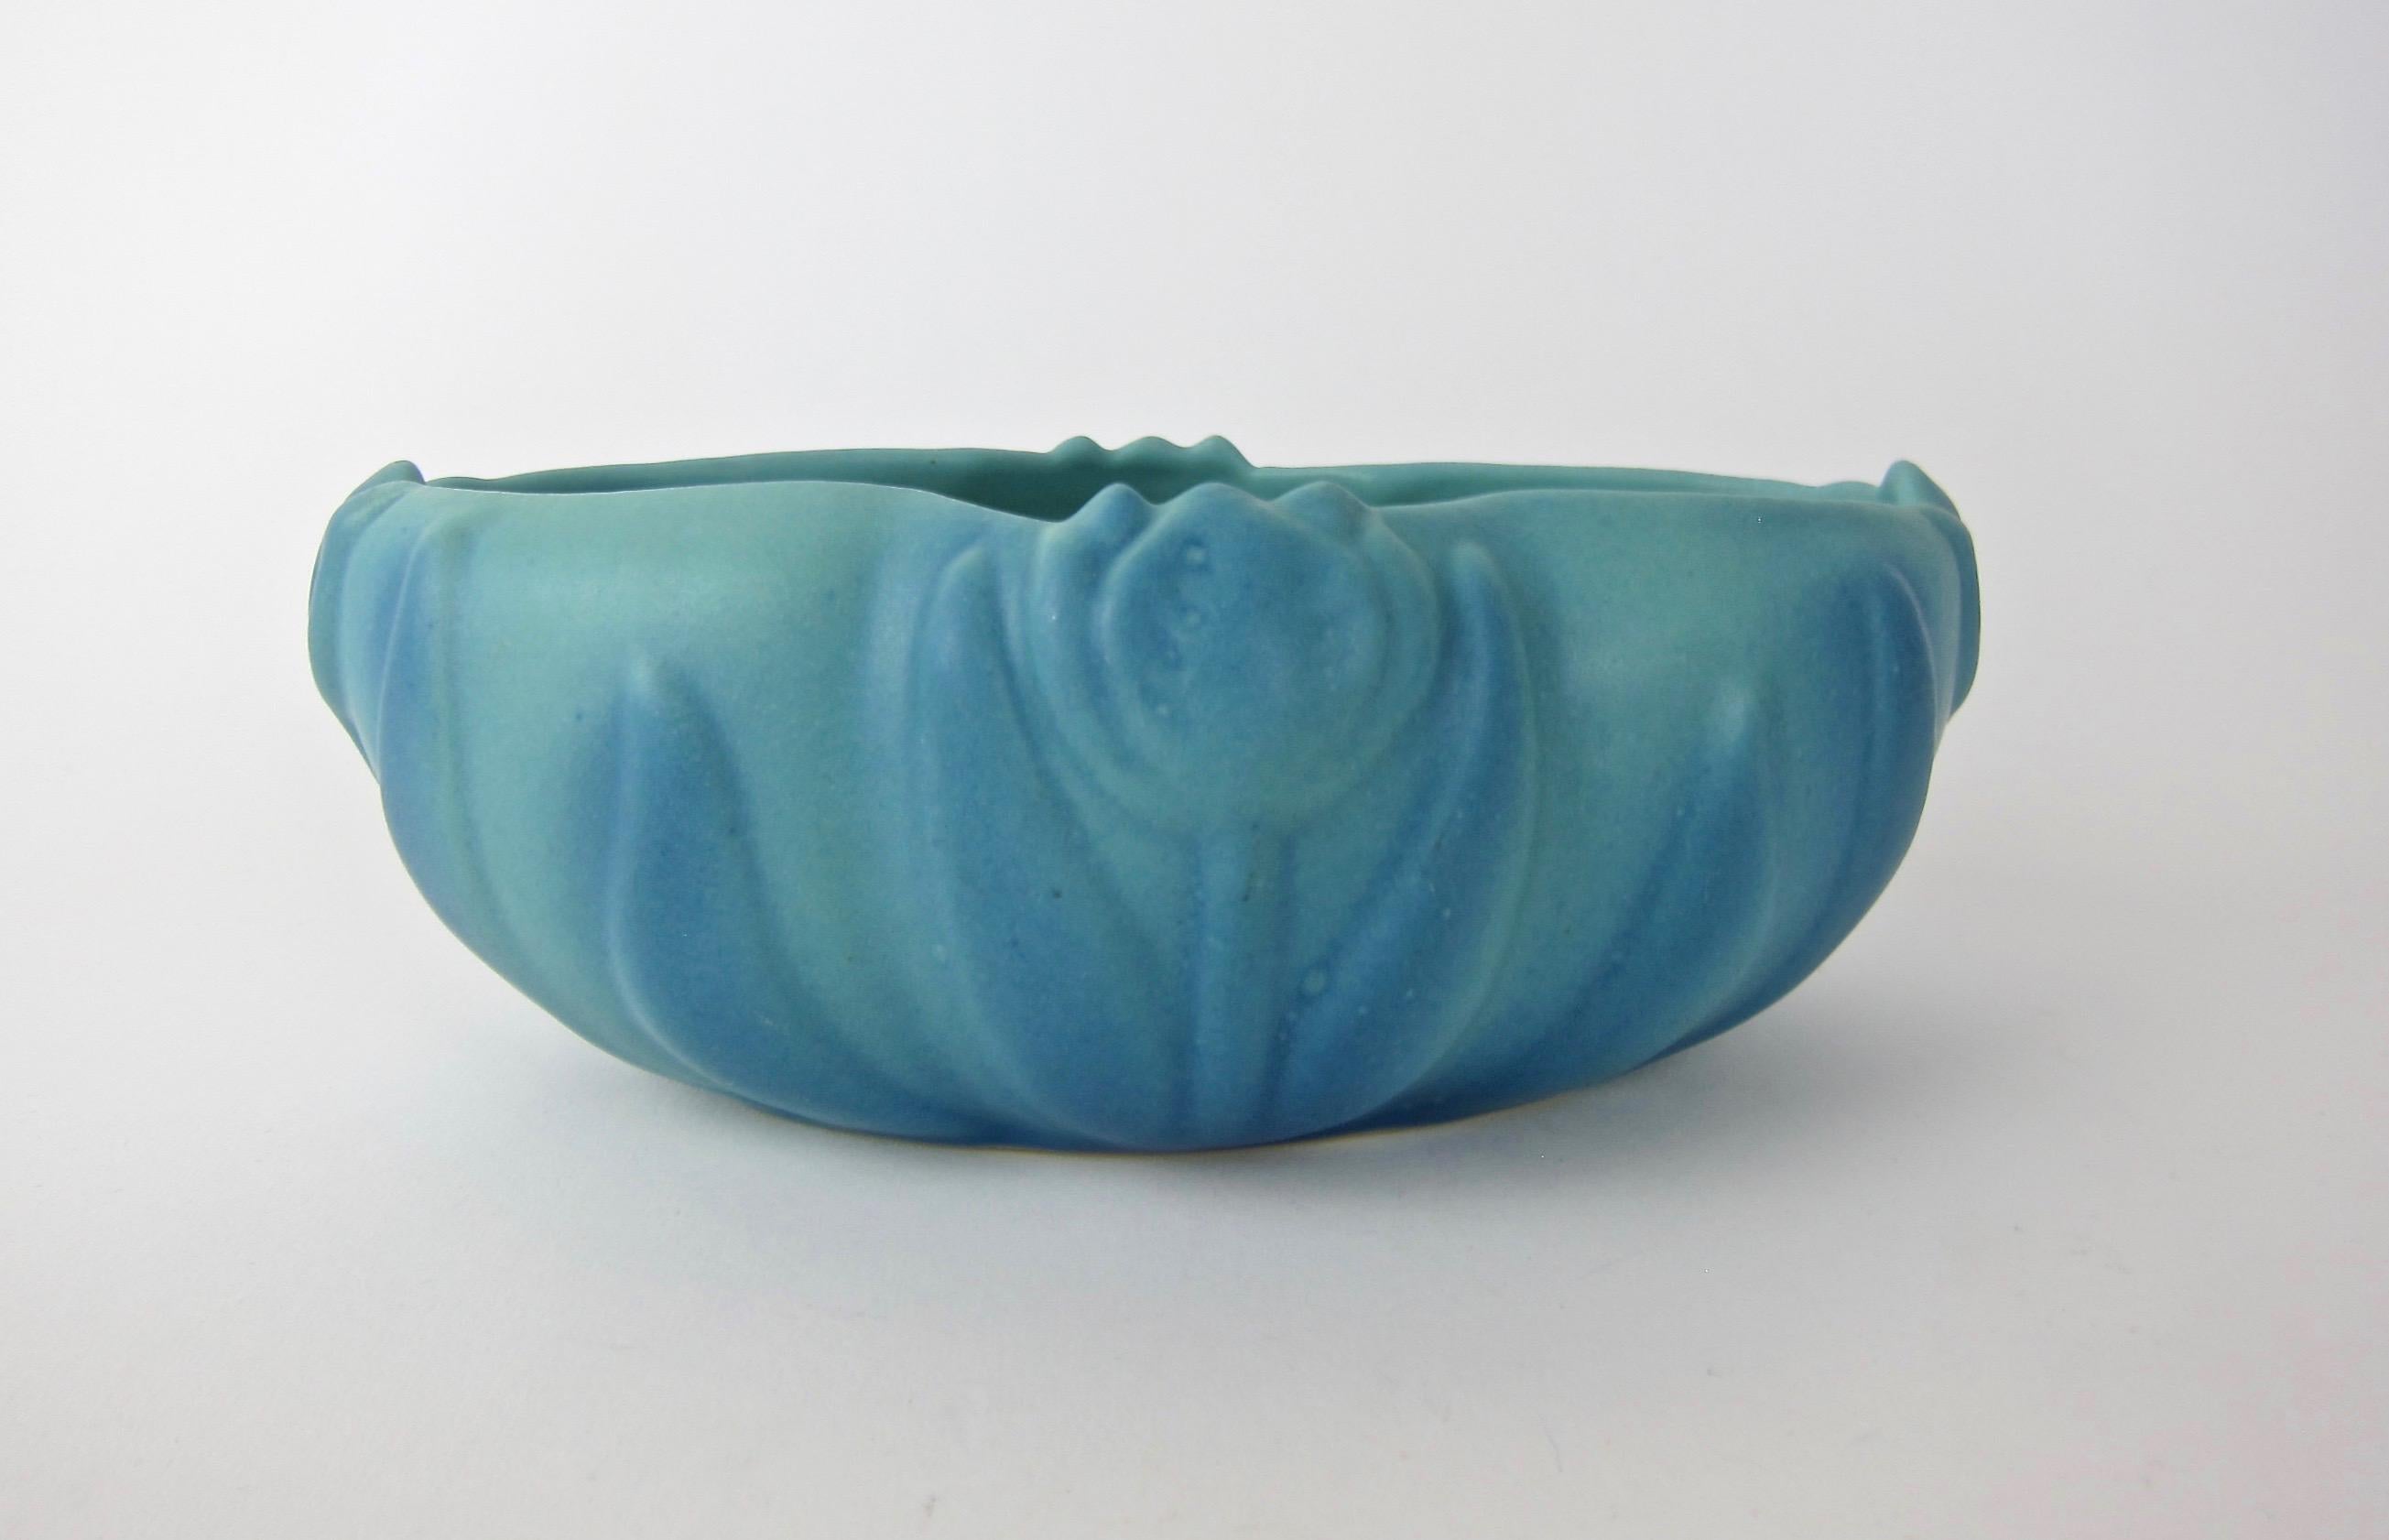 A signed vintage American art pottery planter bowl from Van Briggle Pottery of Colorado Springs, founded in 1901 by Artus Van Briggle. The vessel dates to the 1920s. The oblong shape features Art Nouveau tulip decor enveloped in the company's